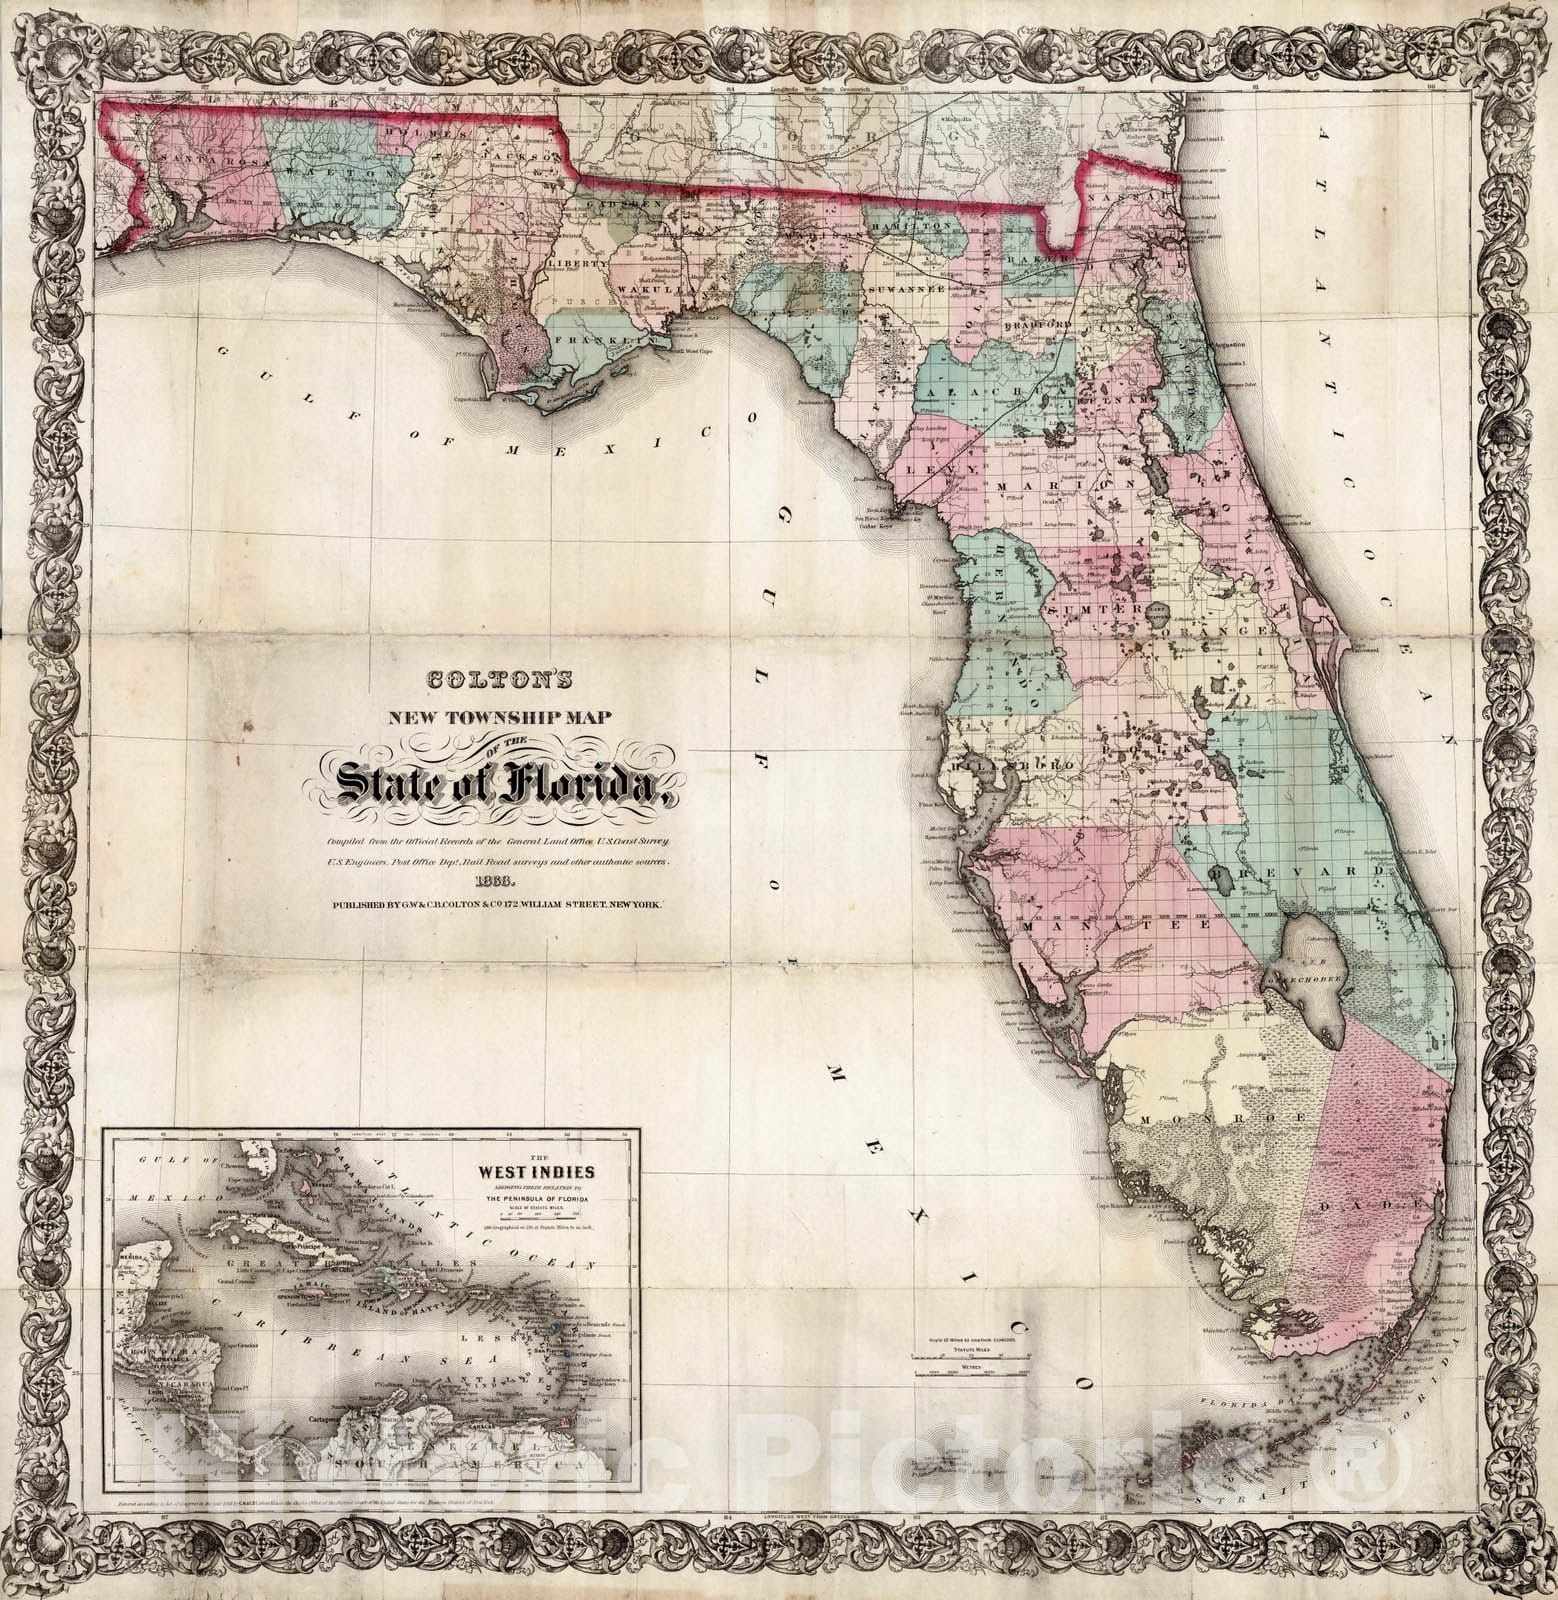 Historic Map : Colton's new township map of the state of Florida, 1868 - Vintage Wall Art